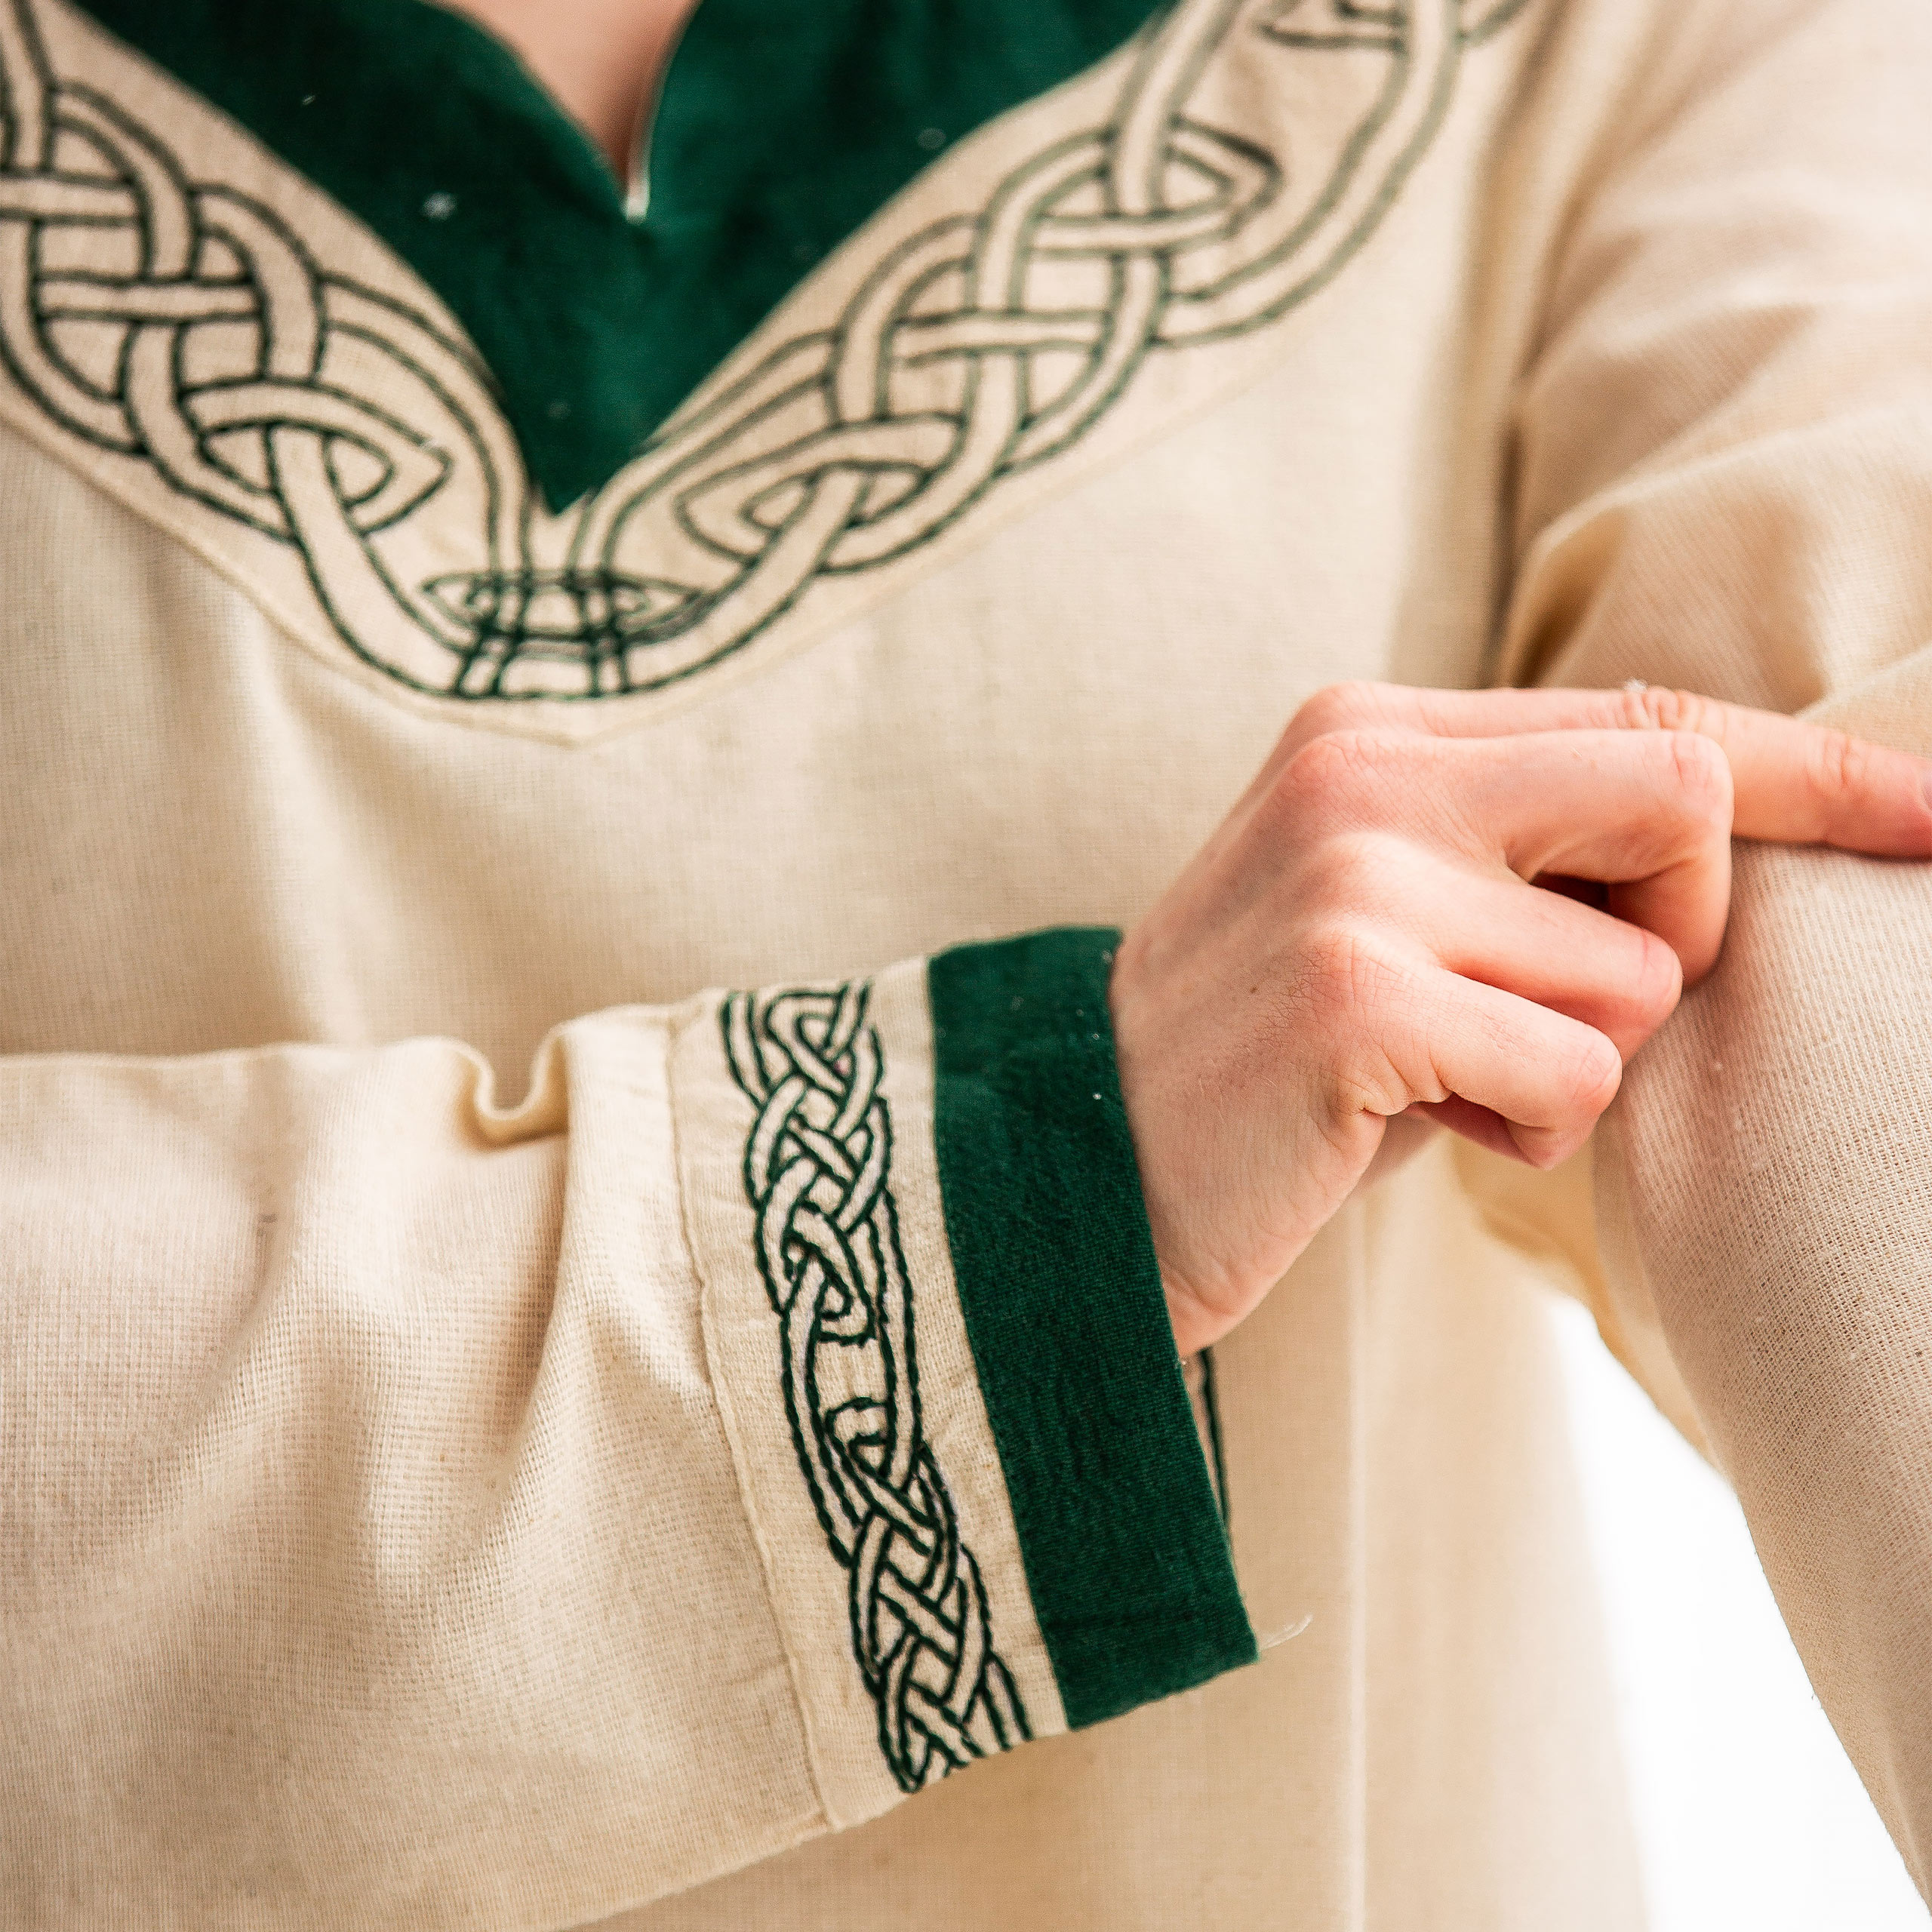 Medieval Dress with Embroidery Beige-Green